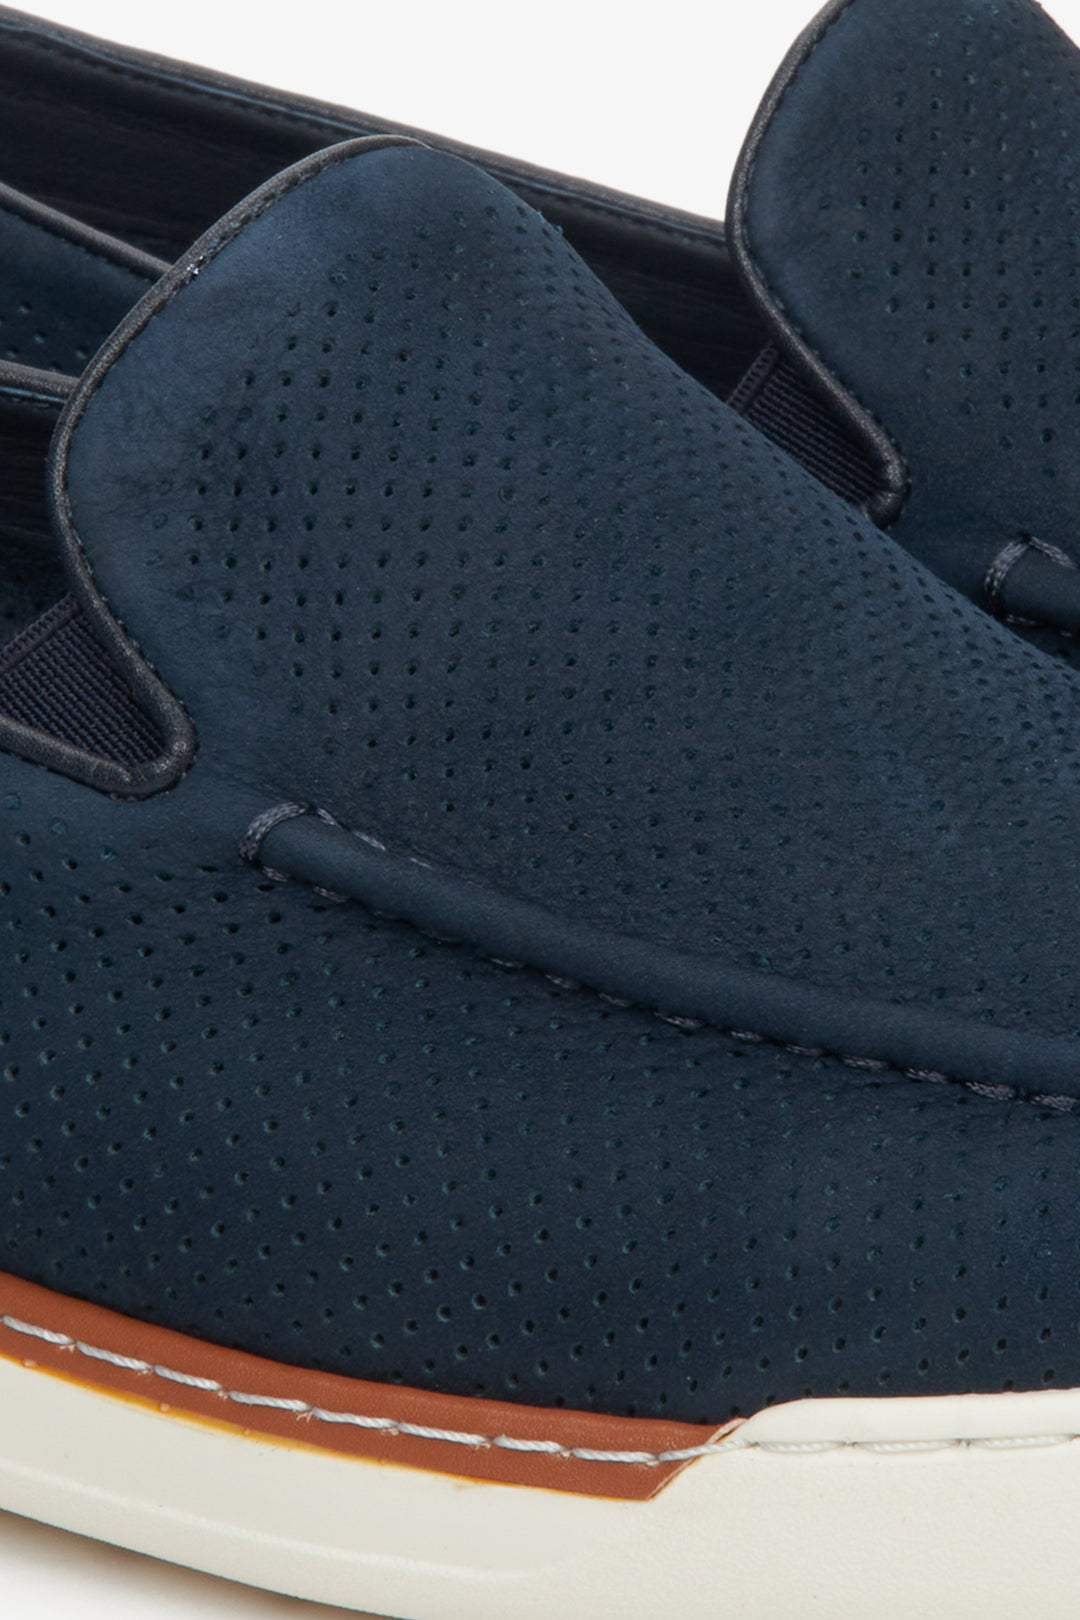 Navy blue nubuck men's moccasins by Estro with perforation - close-up on the details.